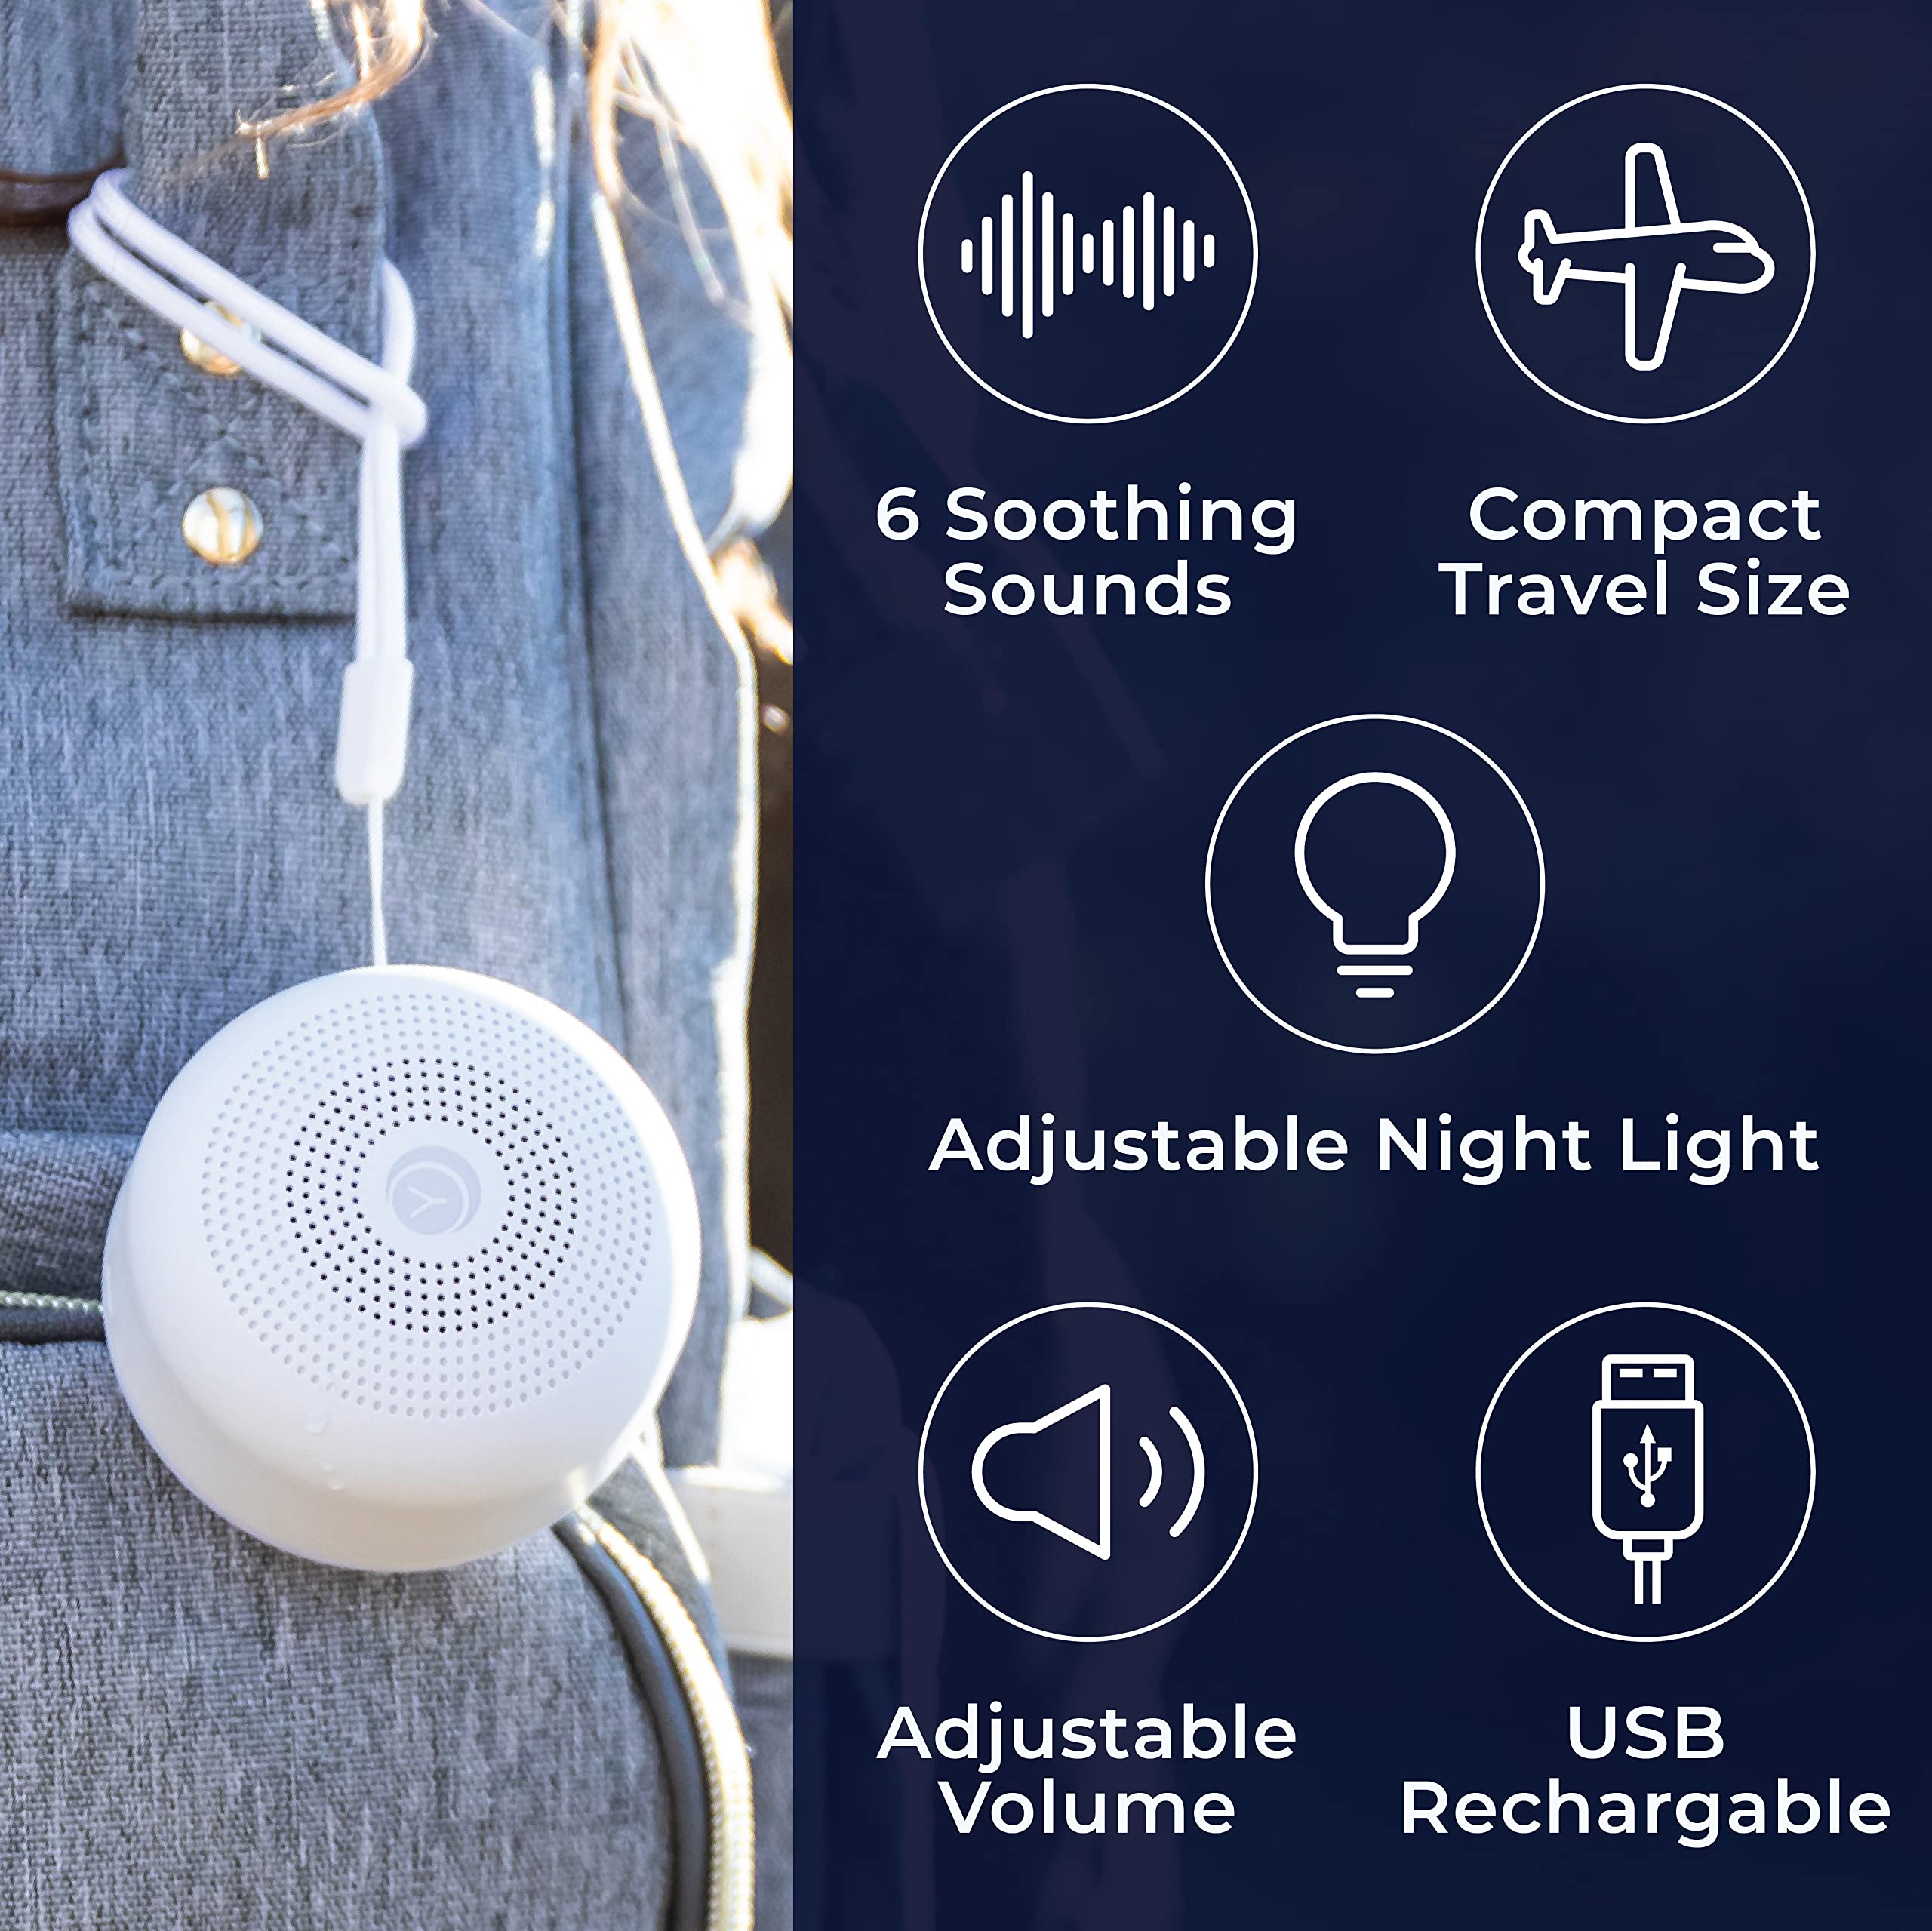 Yogasleep Travel Mini Portable White Noise Sound Machine - 6 Soothing Sounds - Soft Dimmable Night Light - Compact Sleep Therapy for Adults and Baby - USB Rechargeable - Lanyard for Easy Hanging (White)